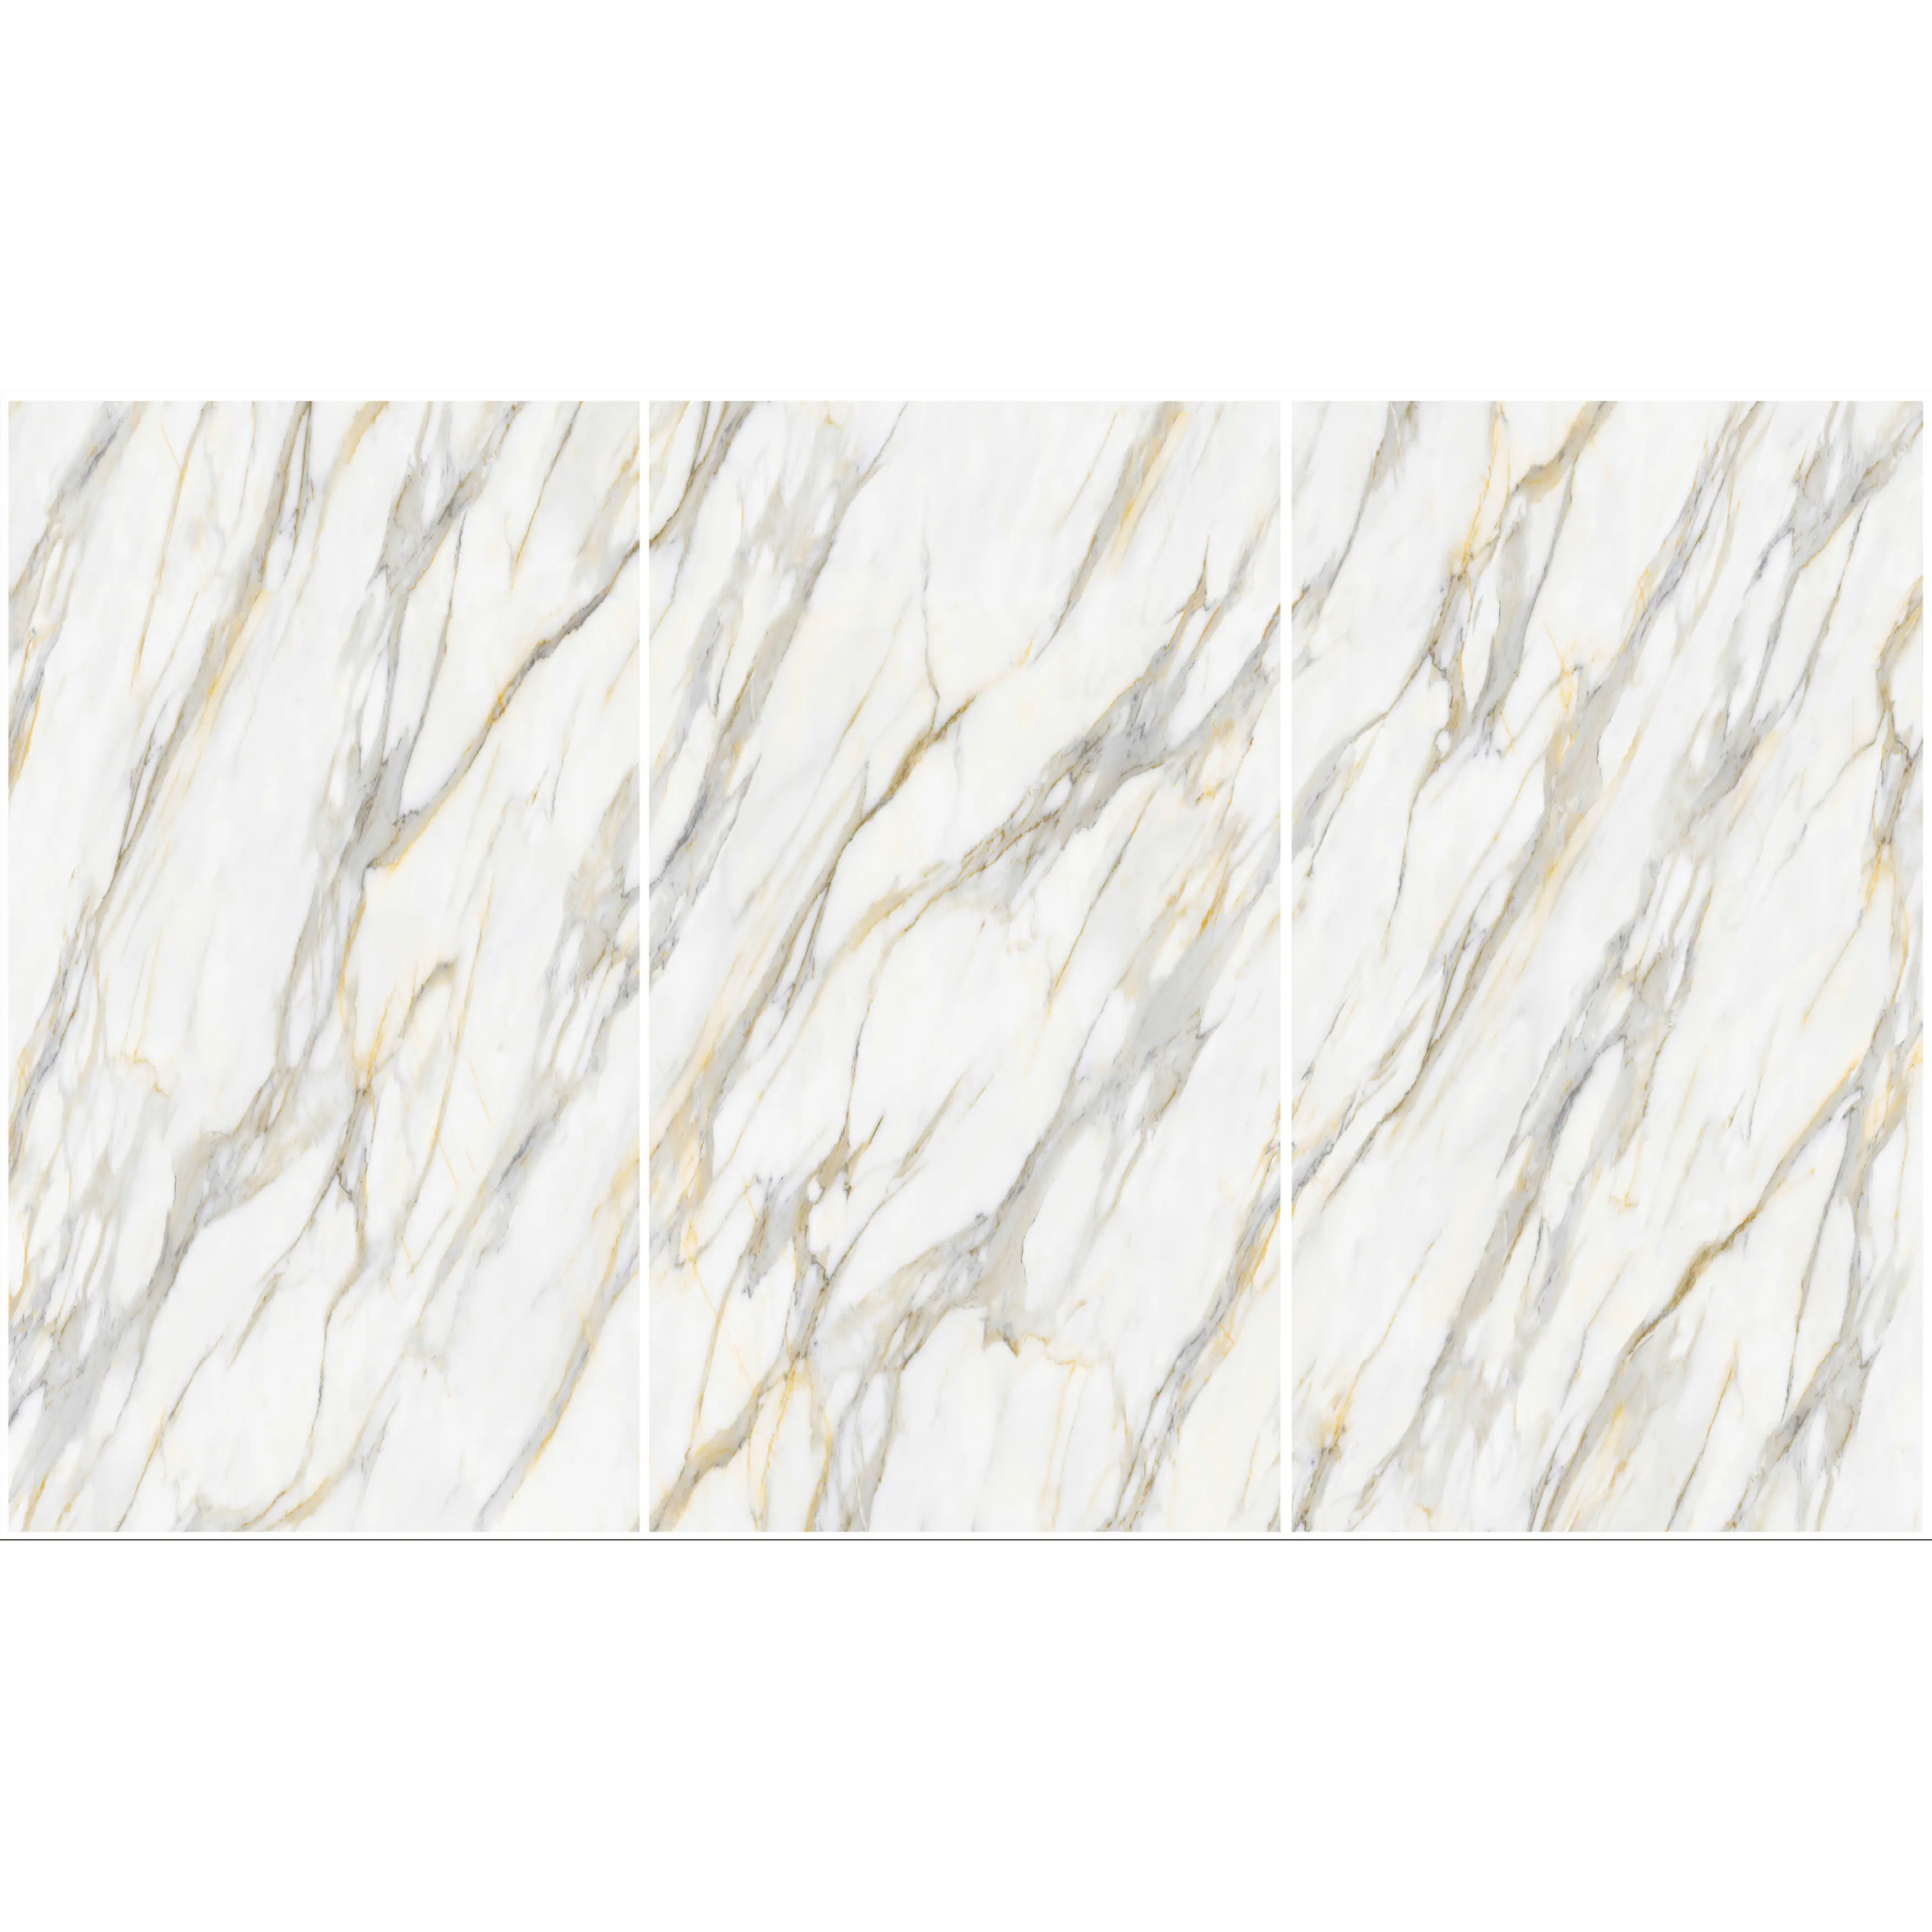 Office Worktop Bathroom Benchtop12MM Thickness Sintered Stone Slab Wall Mounted Royal Gold Marble Pattern Wall Tile 1600*2700mm